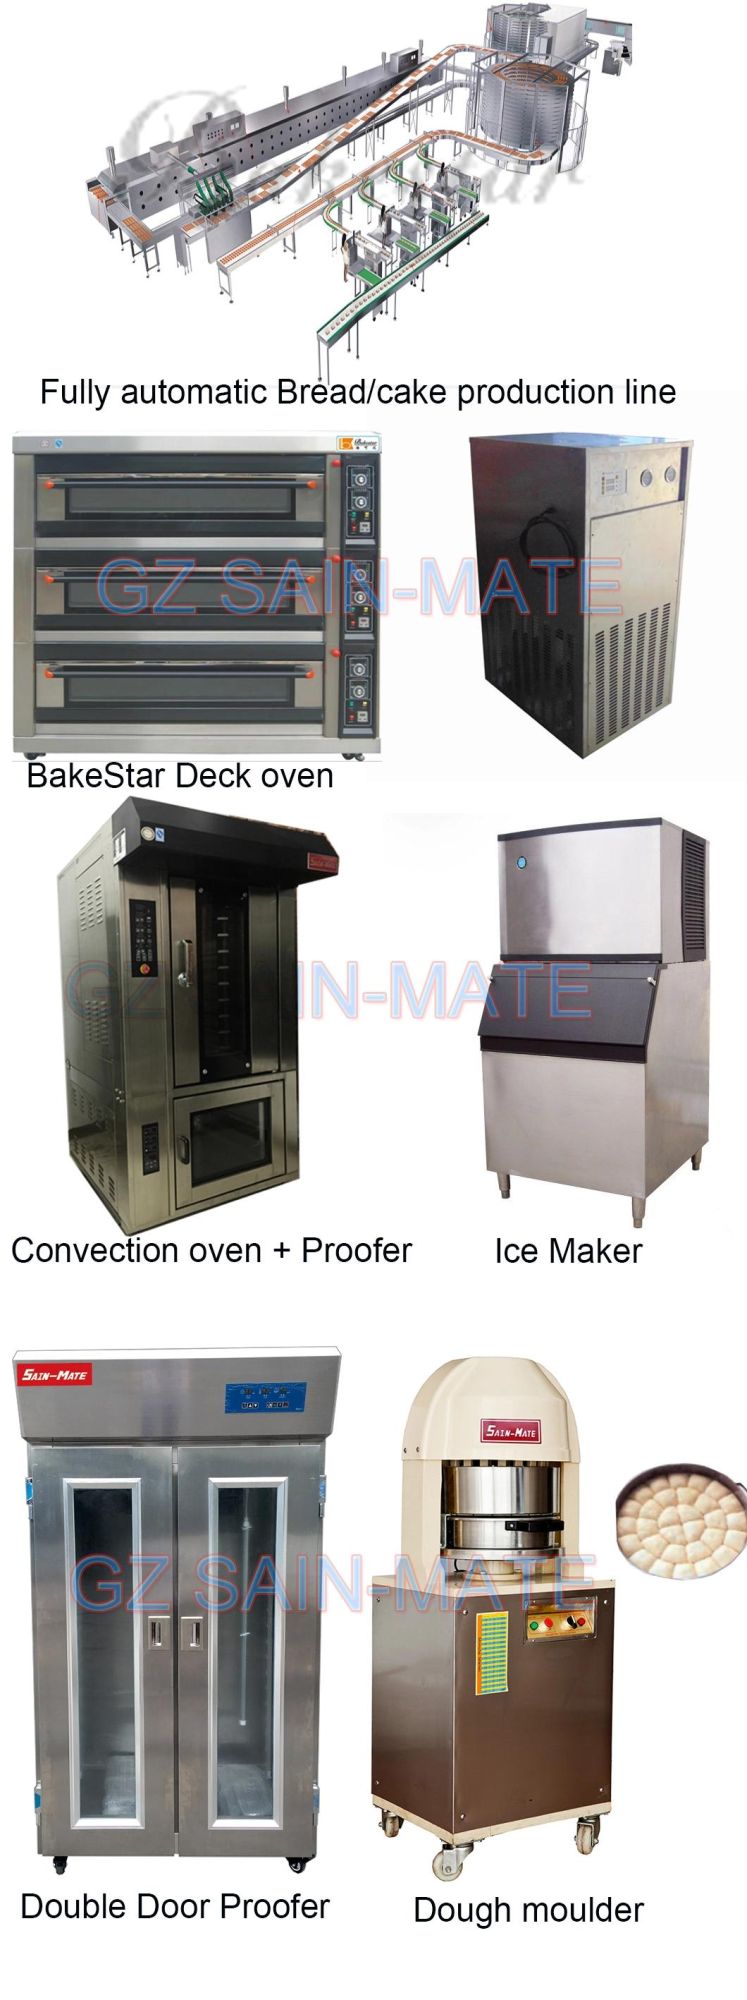 Baking Bread 16 Trays Diesel Rotary Rack Oven, Bake Food Factory Bakery Rotary Oven Equipment Set Mini Diesel Rotary Bakery Oven